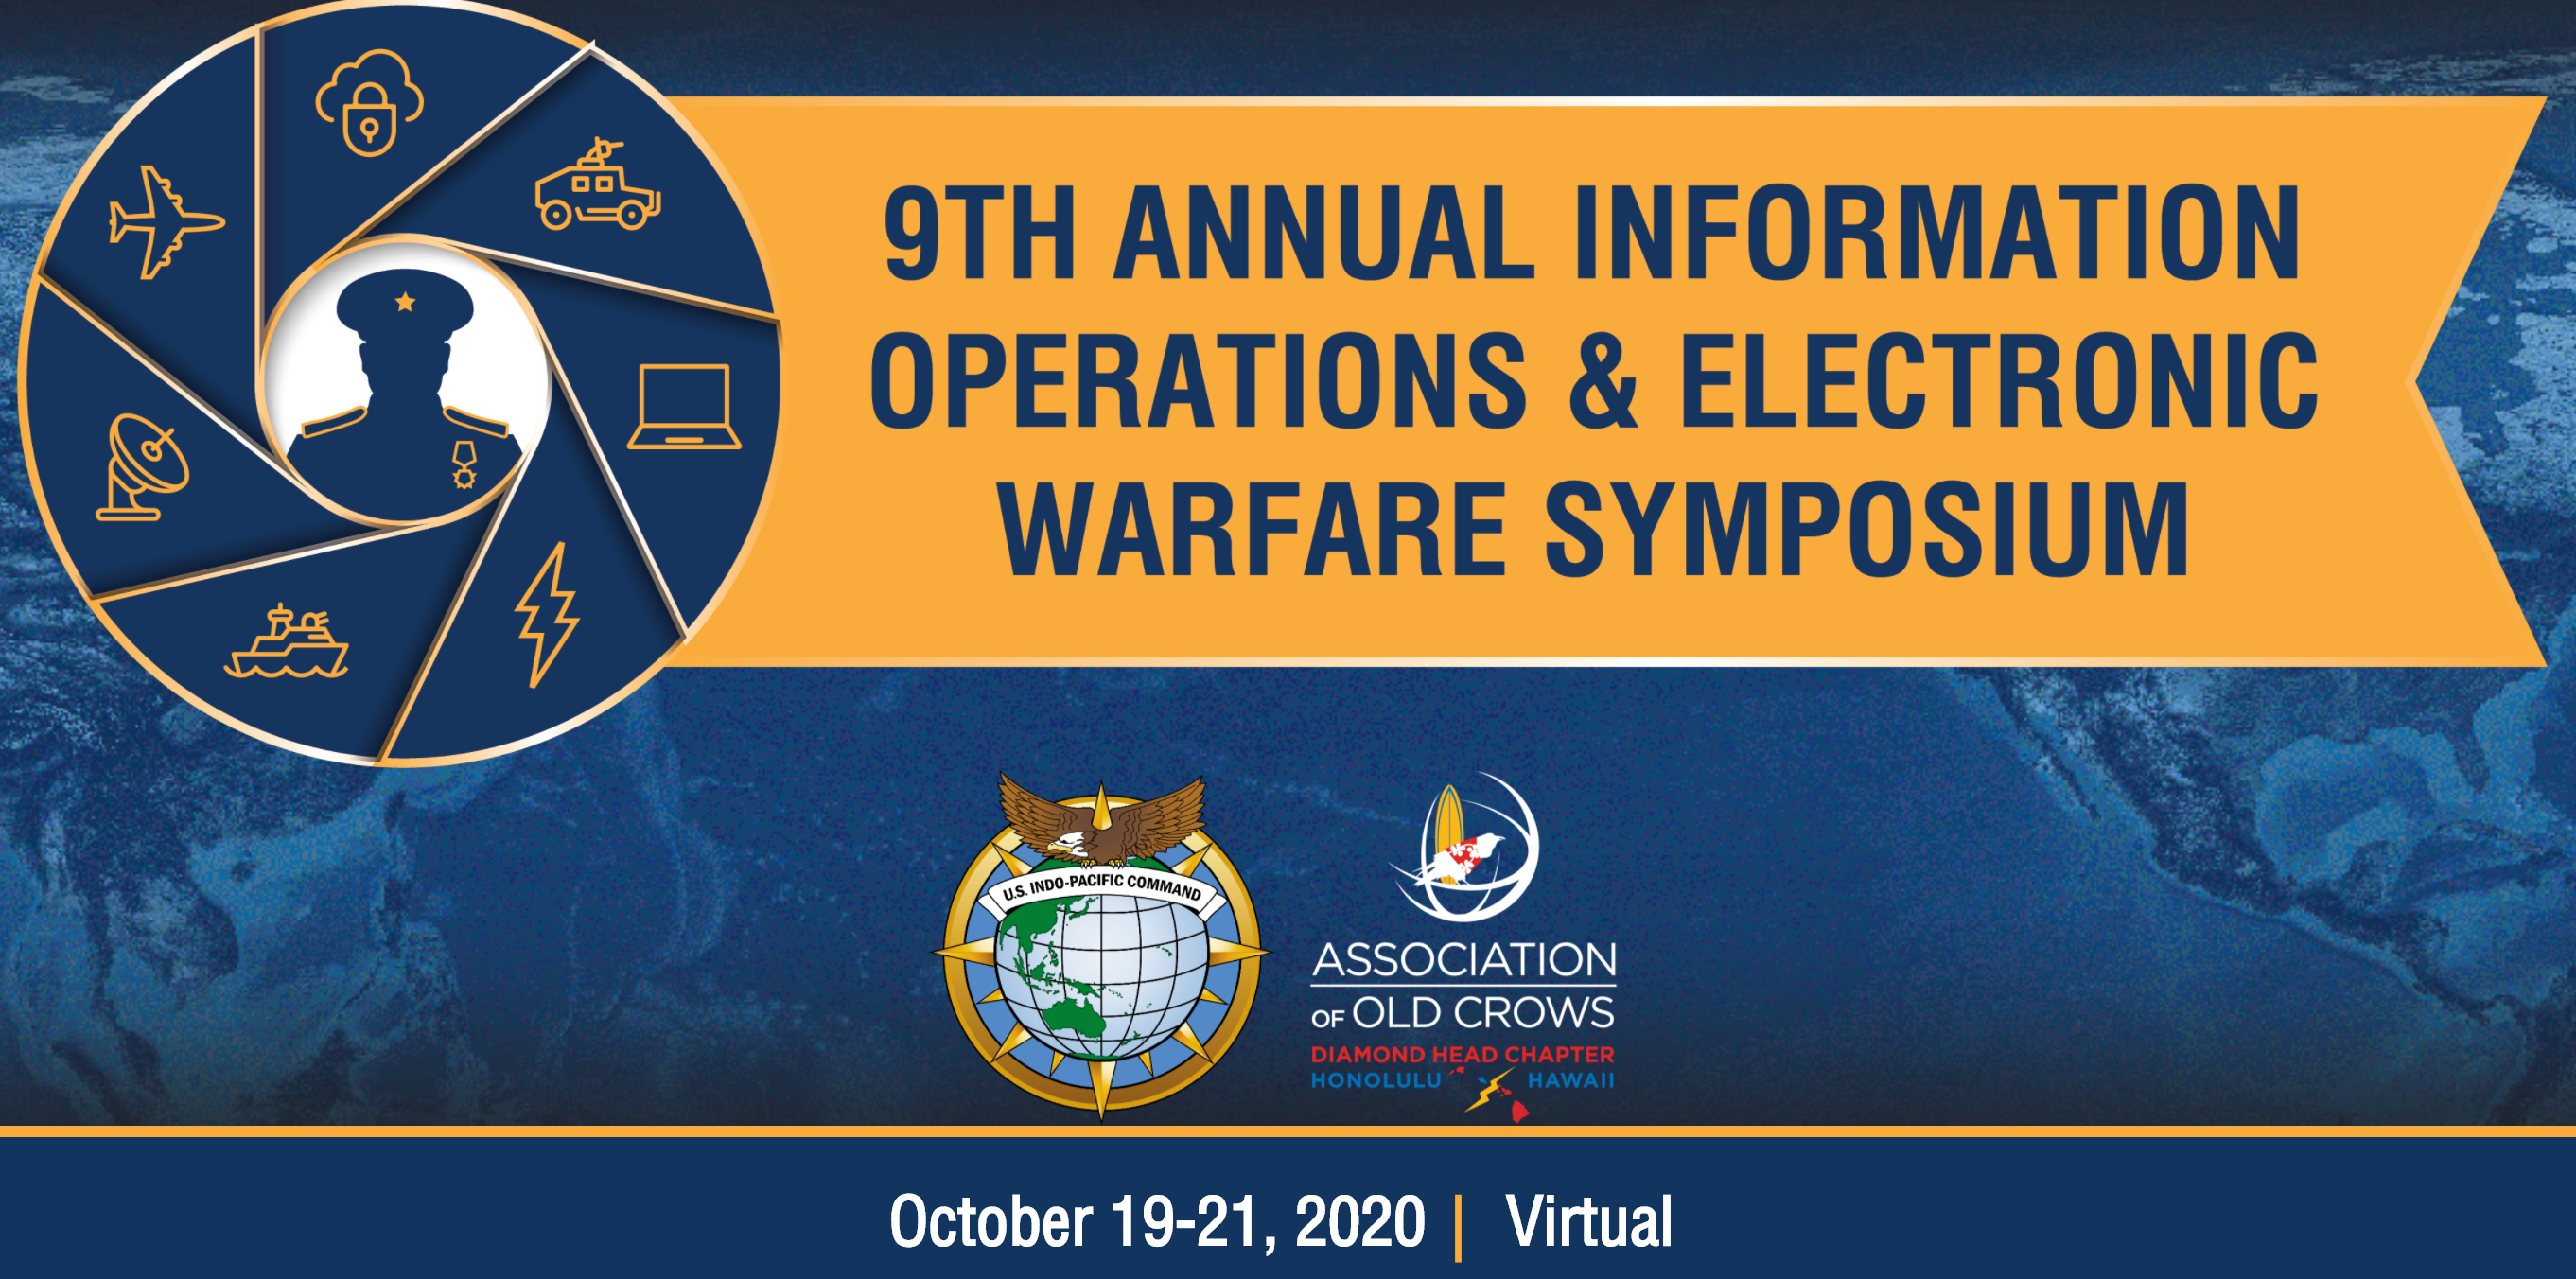 9th Annual Information Operations & Electronic Warfare Symposium